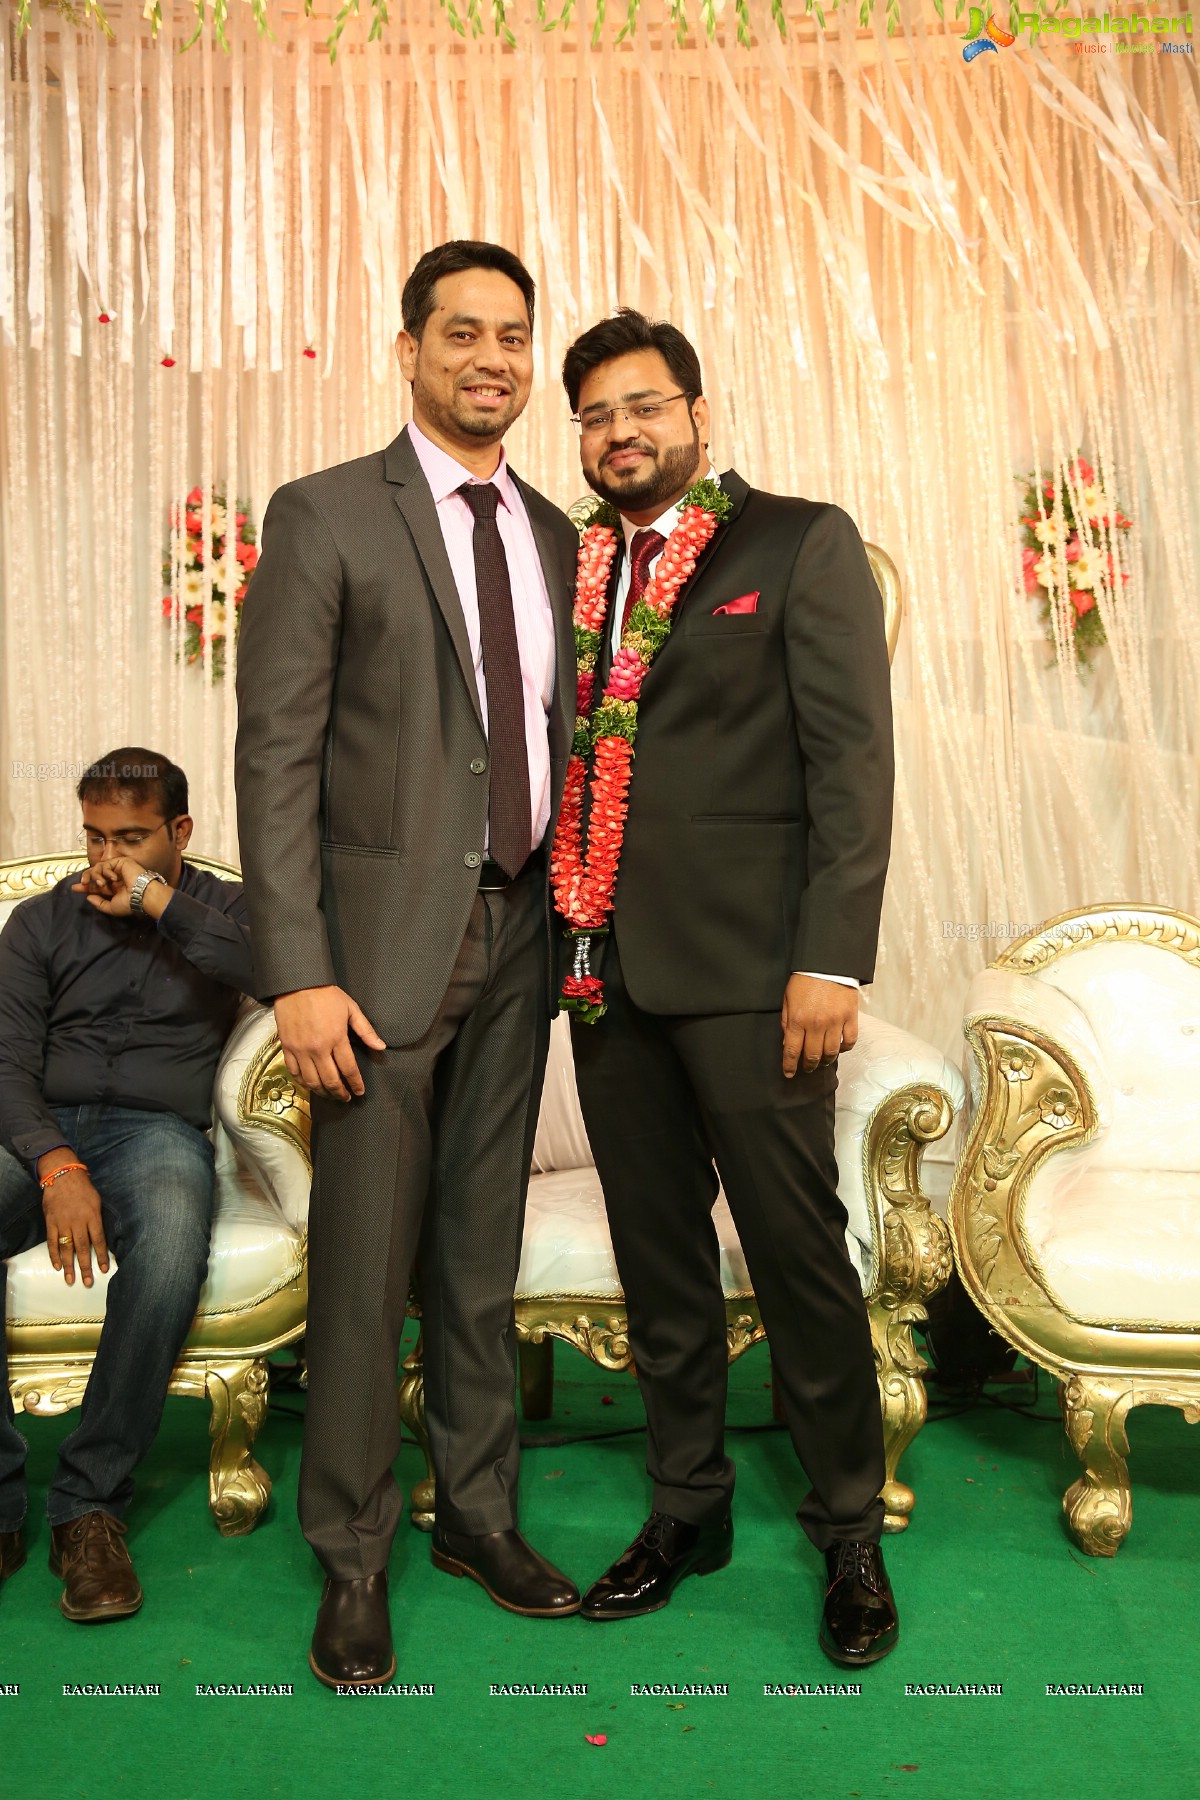 Amjad Hussain Brother In Law Dinner Reception at Sridhar Fuction Plaza